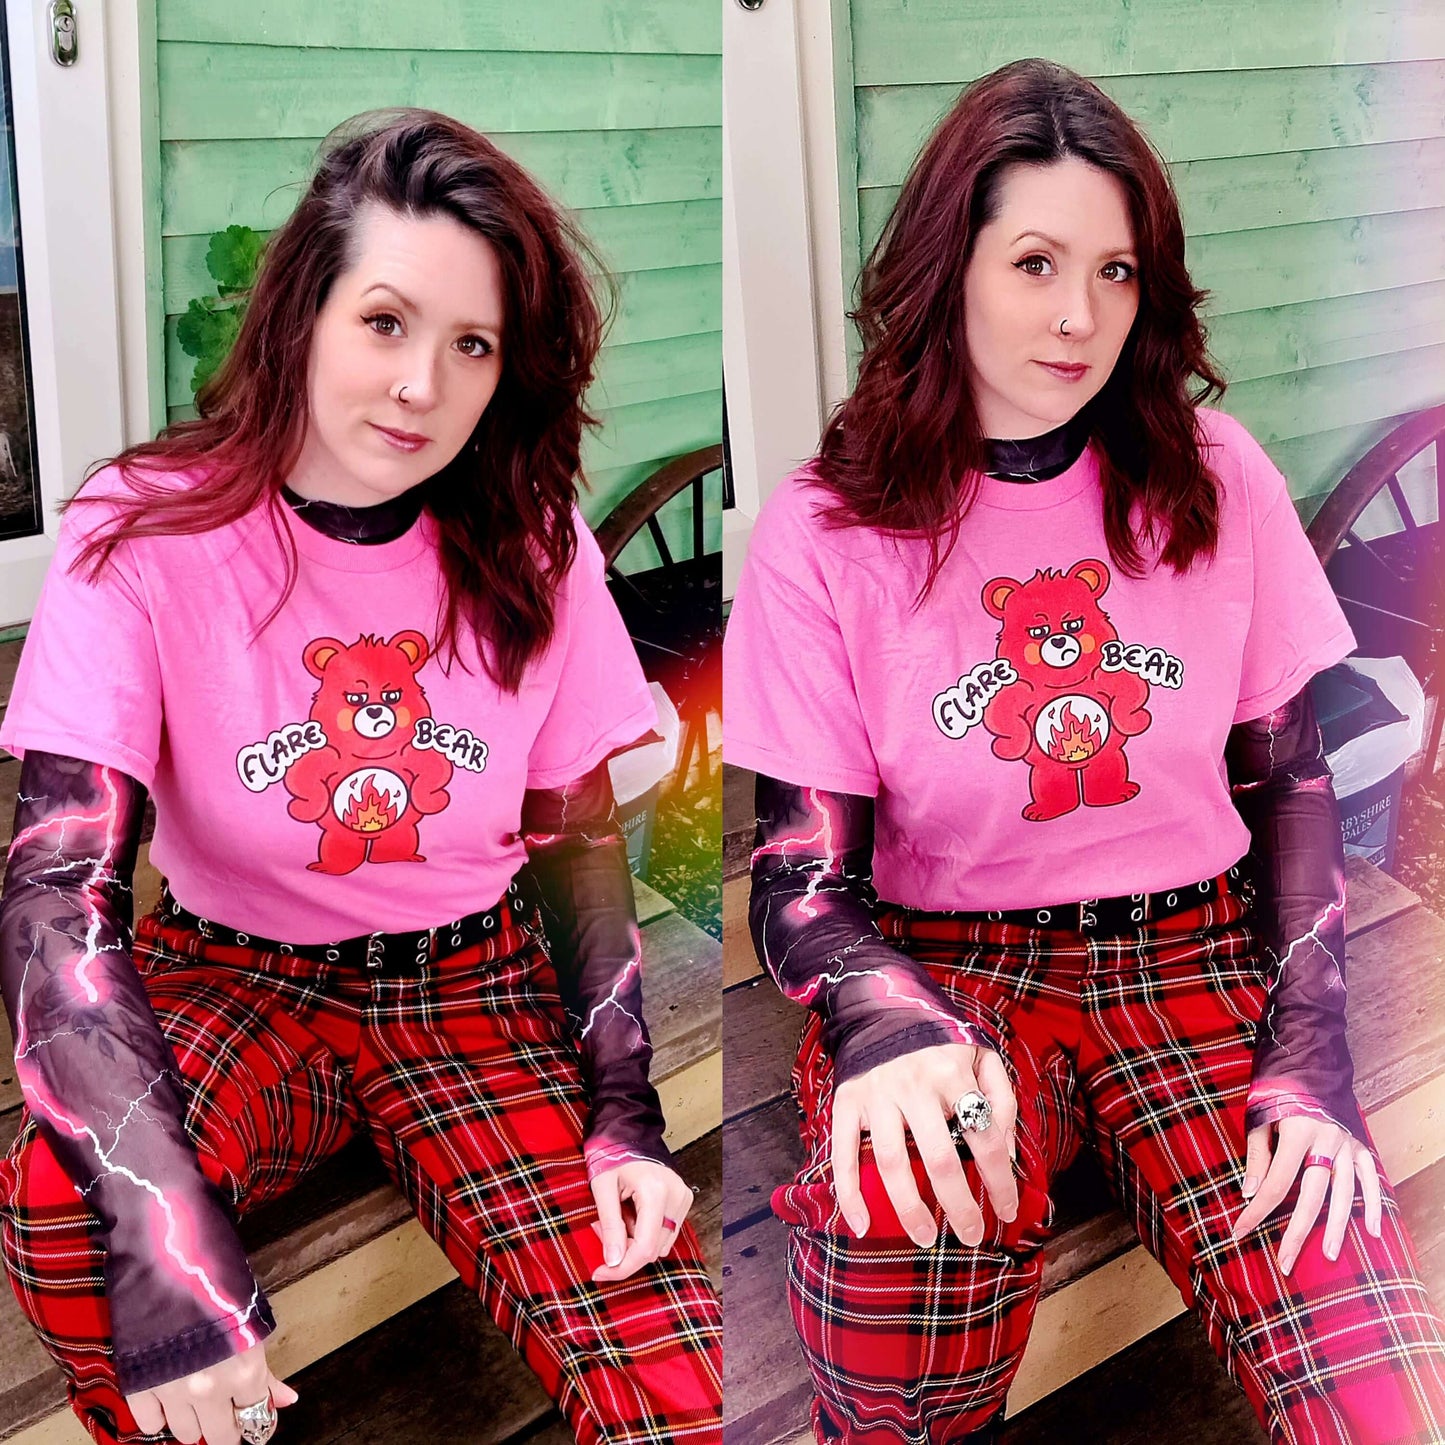 A collage of Nikky wearing a pink Flare Bear T-shirt sat outside with red tartan trousers, a pink and black lightning bolt mesh top. The pastel pink tee is of a red bear with a fed up expression and hands on its hips. There is a white circle on its belly with flames inside. Flare Bear is written on the middle. The tshirt is designed to raise awareness for chronic illness flare ups.